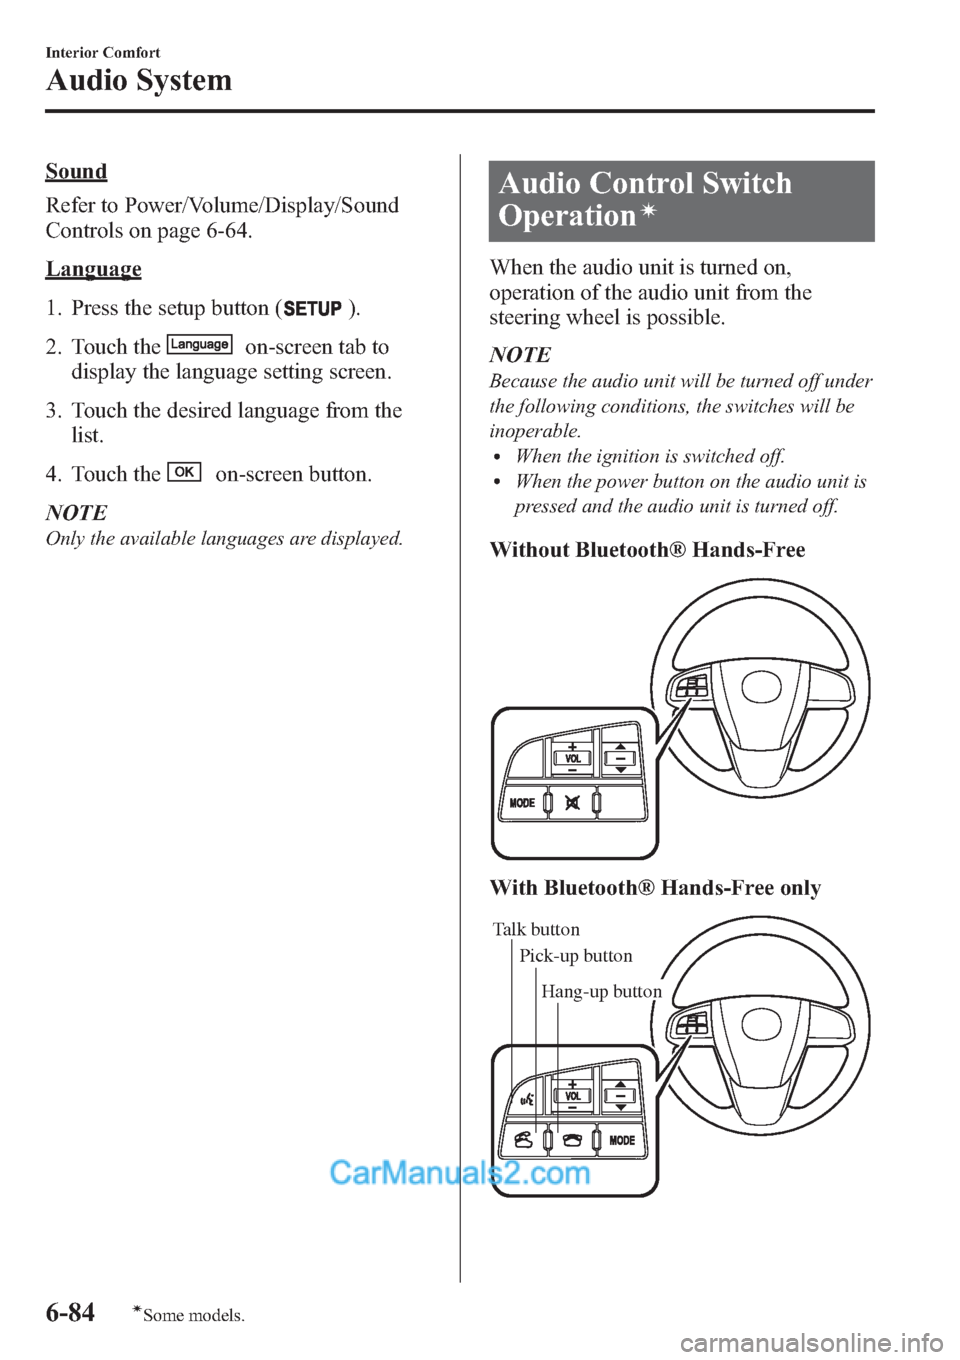 MAZDA MODEL MAZDASPEED 3 2013  Owners Manual (in English) Sound
Refer to Power/Volume/Display/Sound
Controls on page 6-64.
Language
1. Press the setup button (
).
2. Touch the
on-screen tab to
display the language setting screen.
3. Touch the desired languag